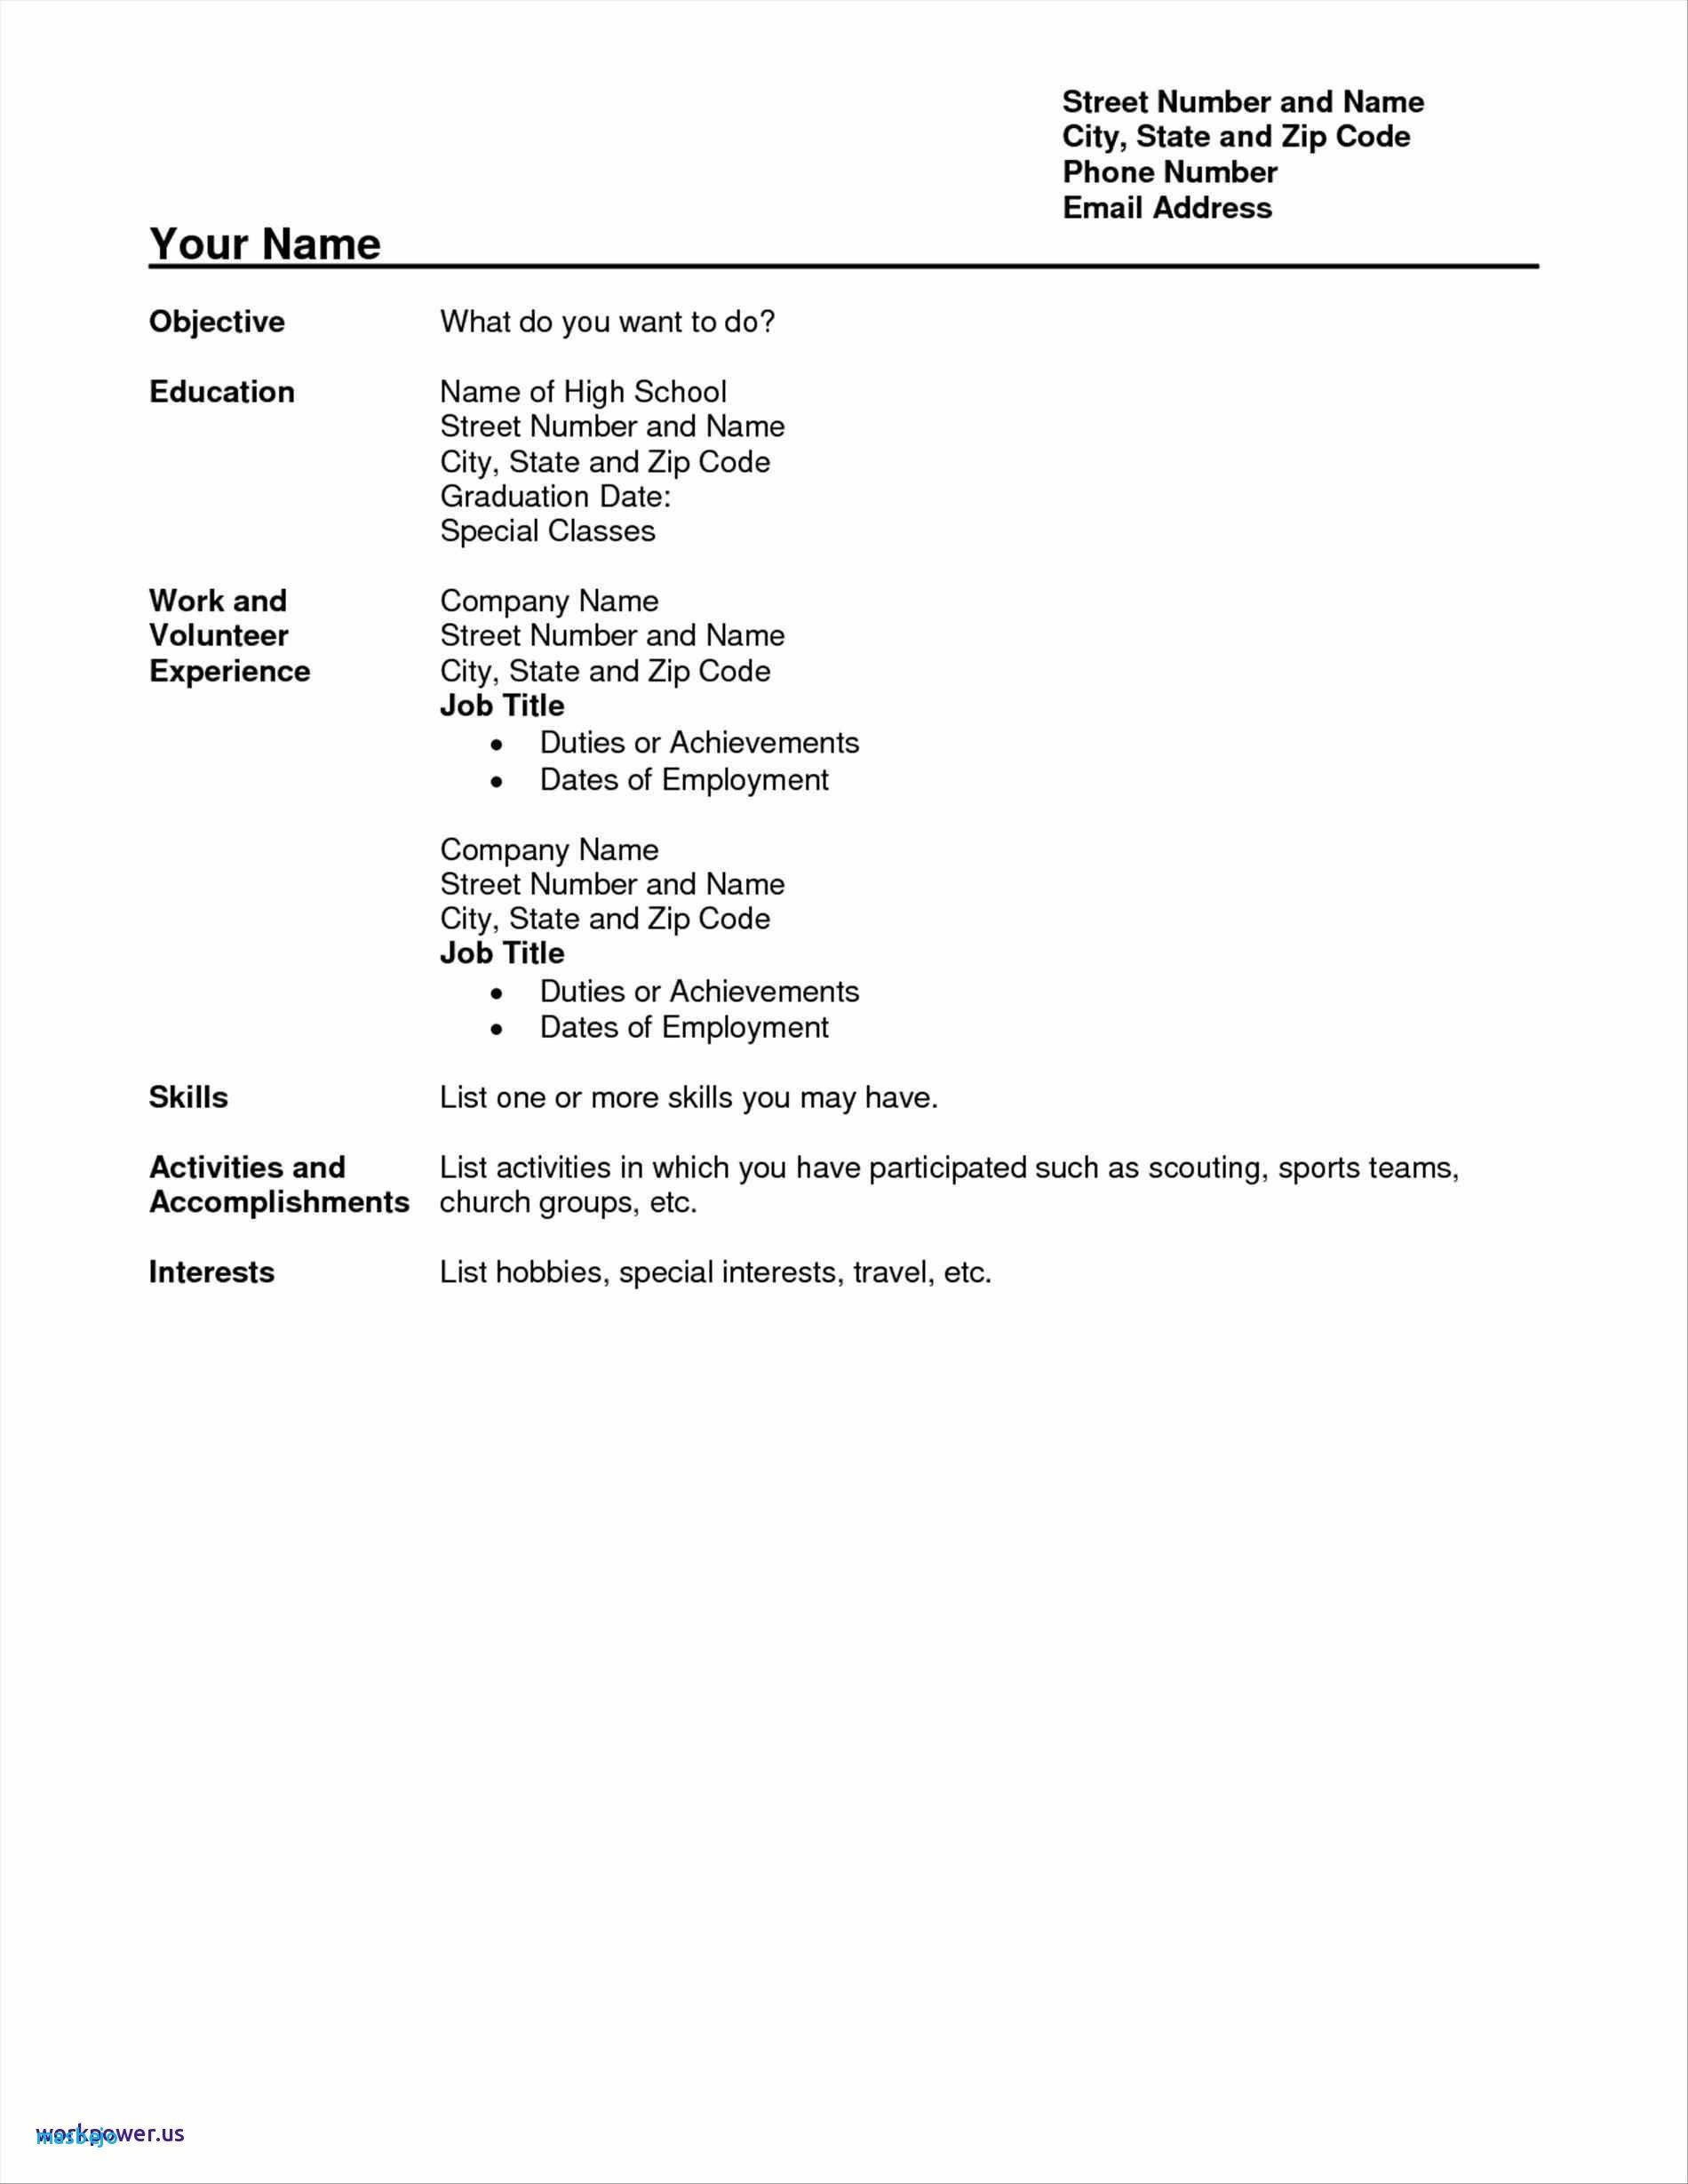 Resume Templates for Students In High School with No Experience Resume Examples No Experience – Resume Templates